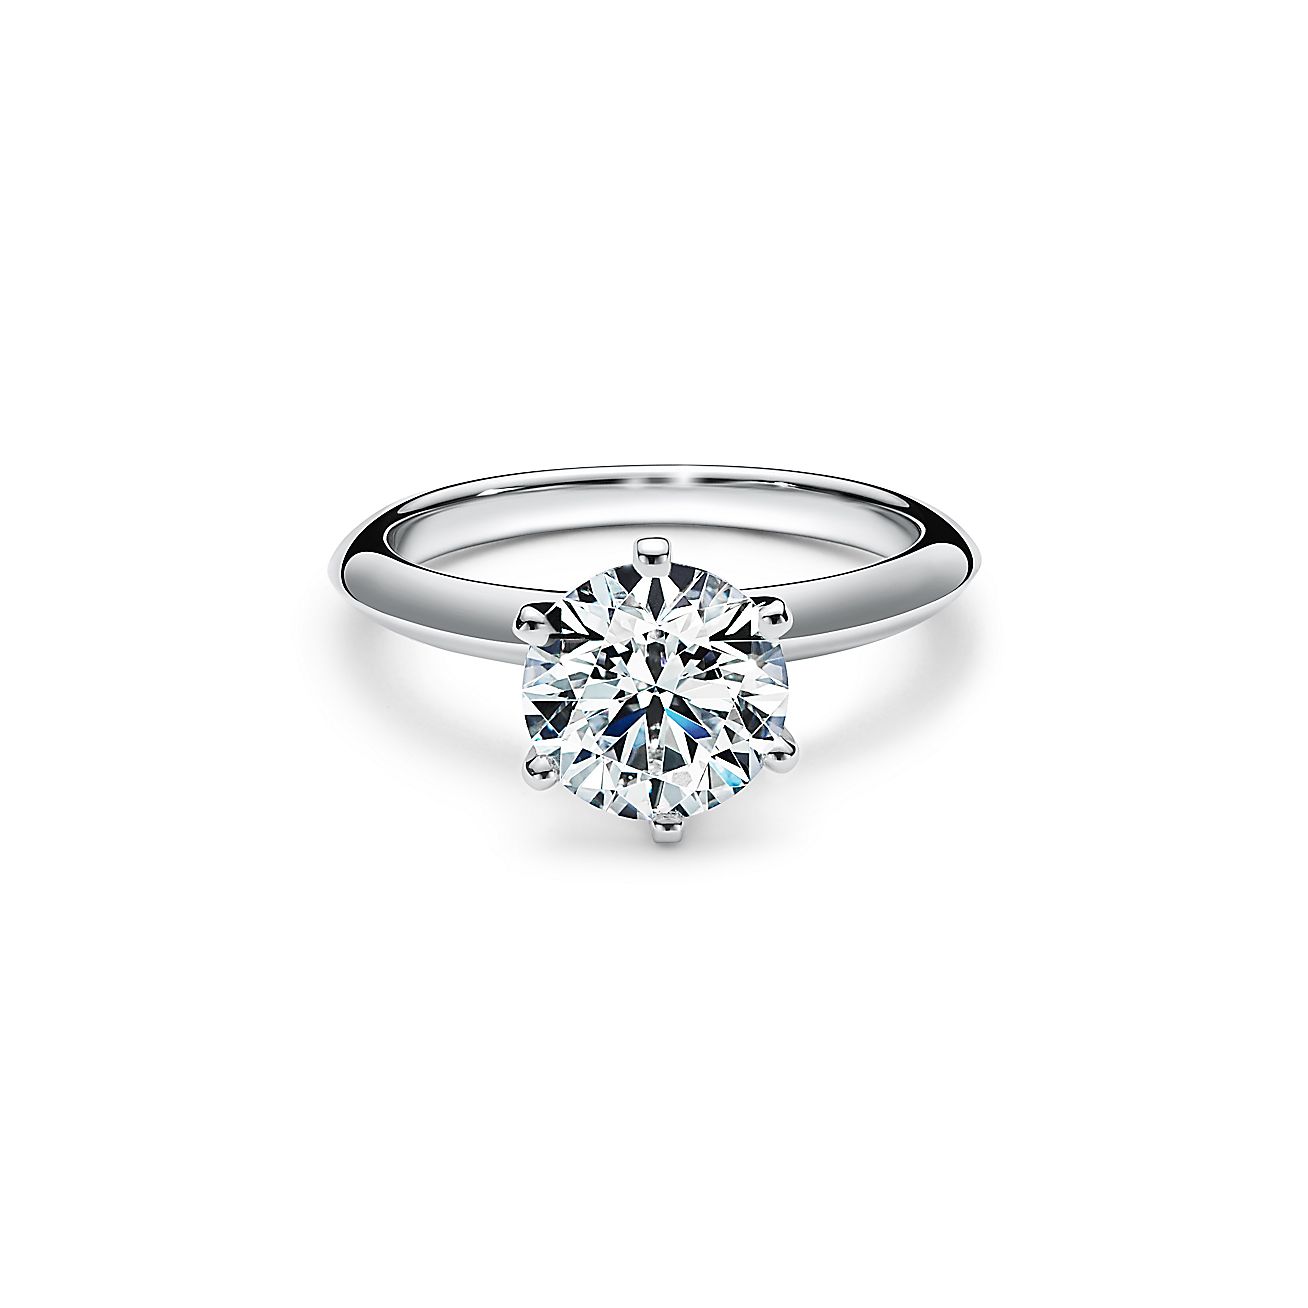 iets Logisch Ver weg The Tiffany® Setting in platinum: world's most iconic engagement ring. |  Tiffany & Co.